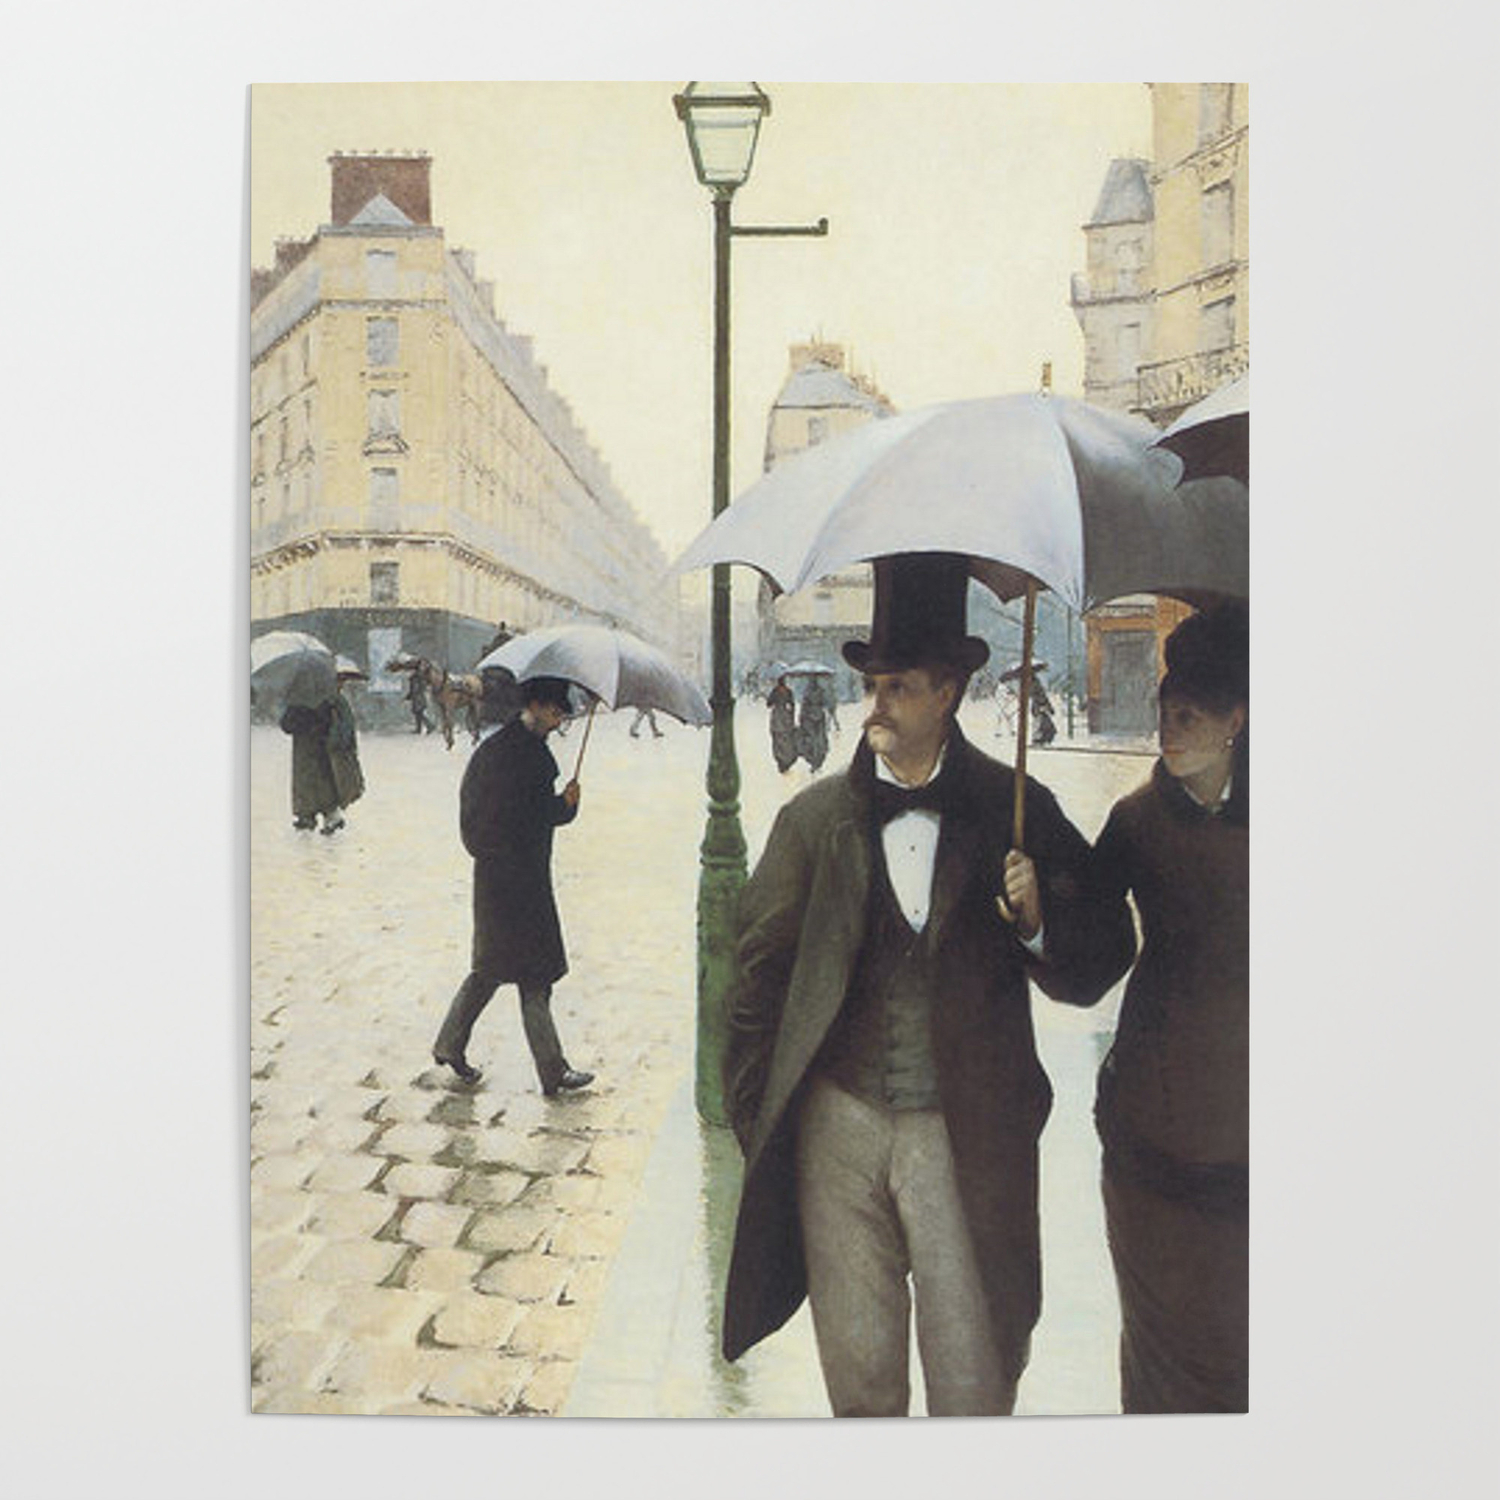 Rainy Day Size 18x24 inch Gustave Caillebotte Poster art print wall décor Paris Street 